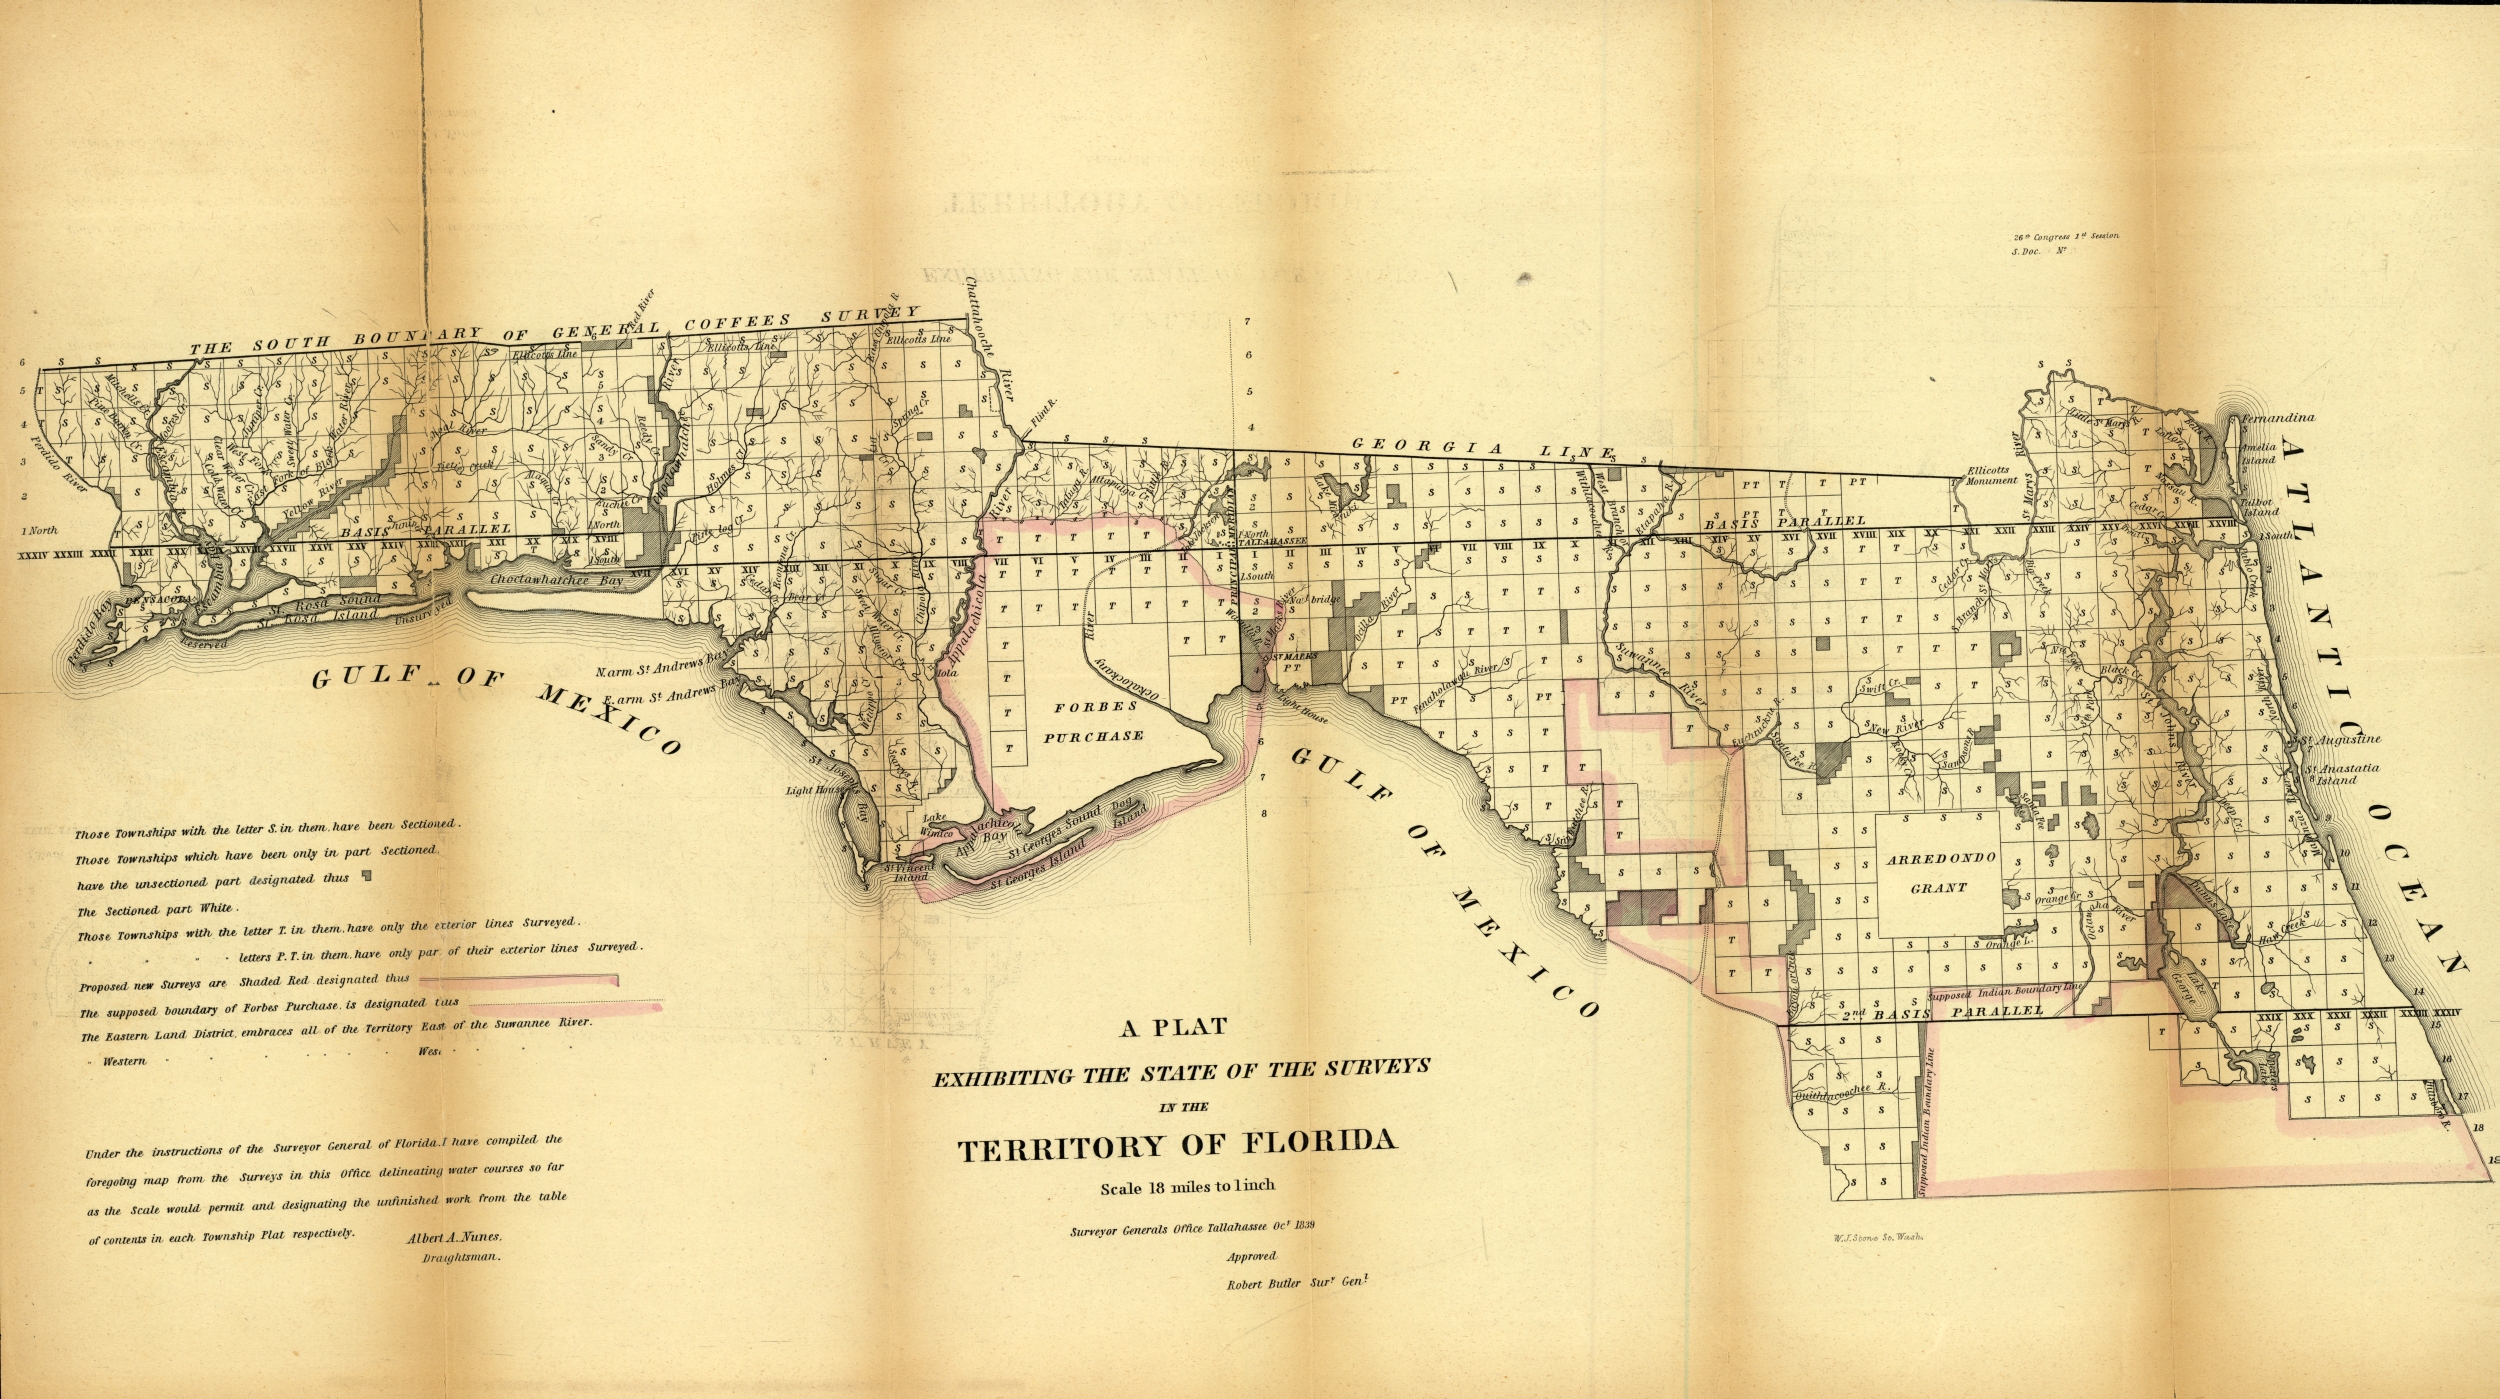 State of the Surveys of Territorial Florida, 1839